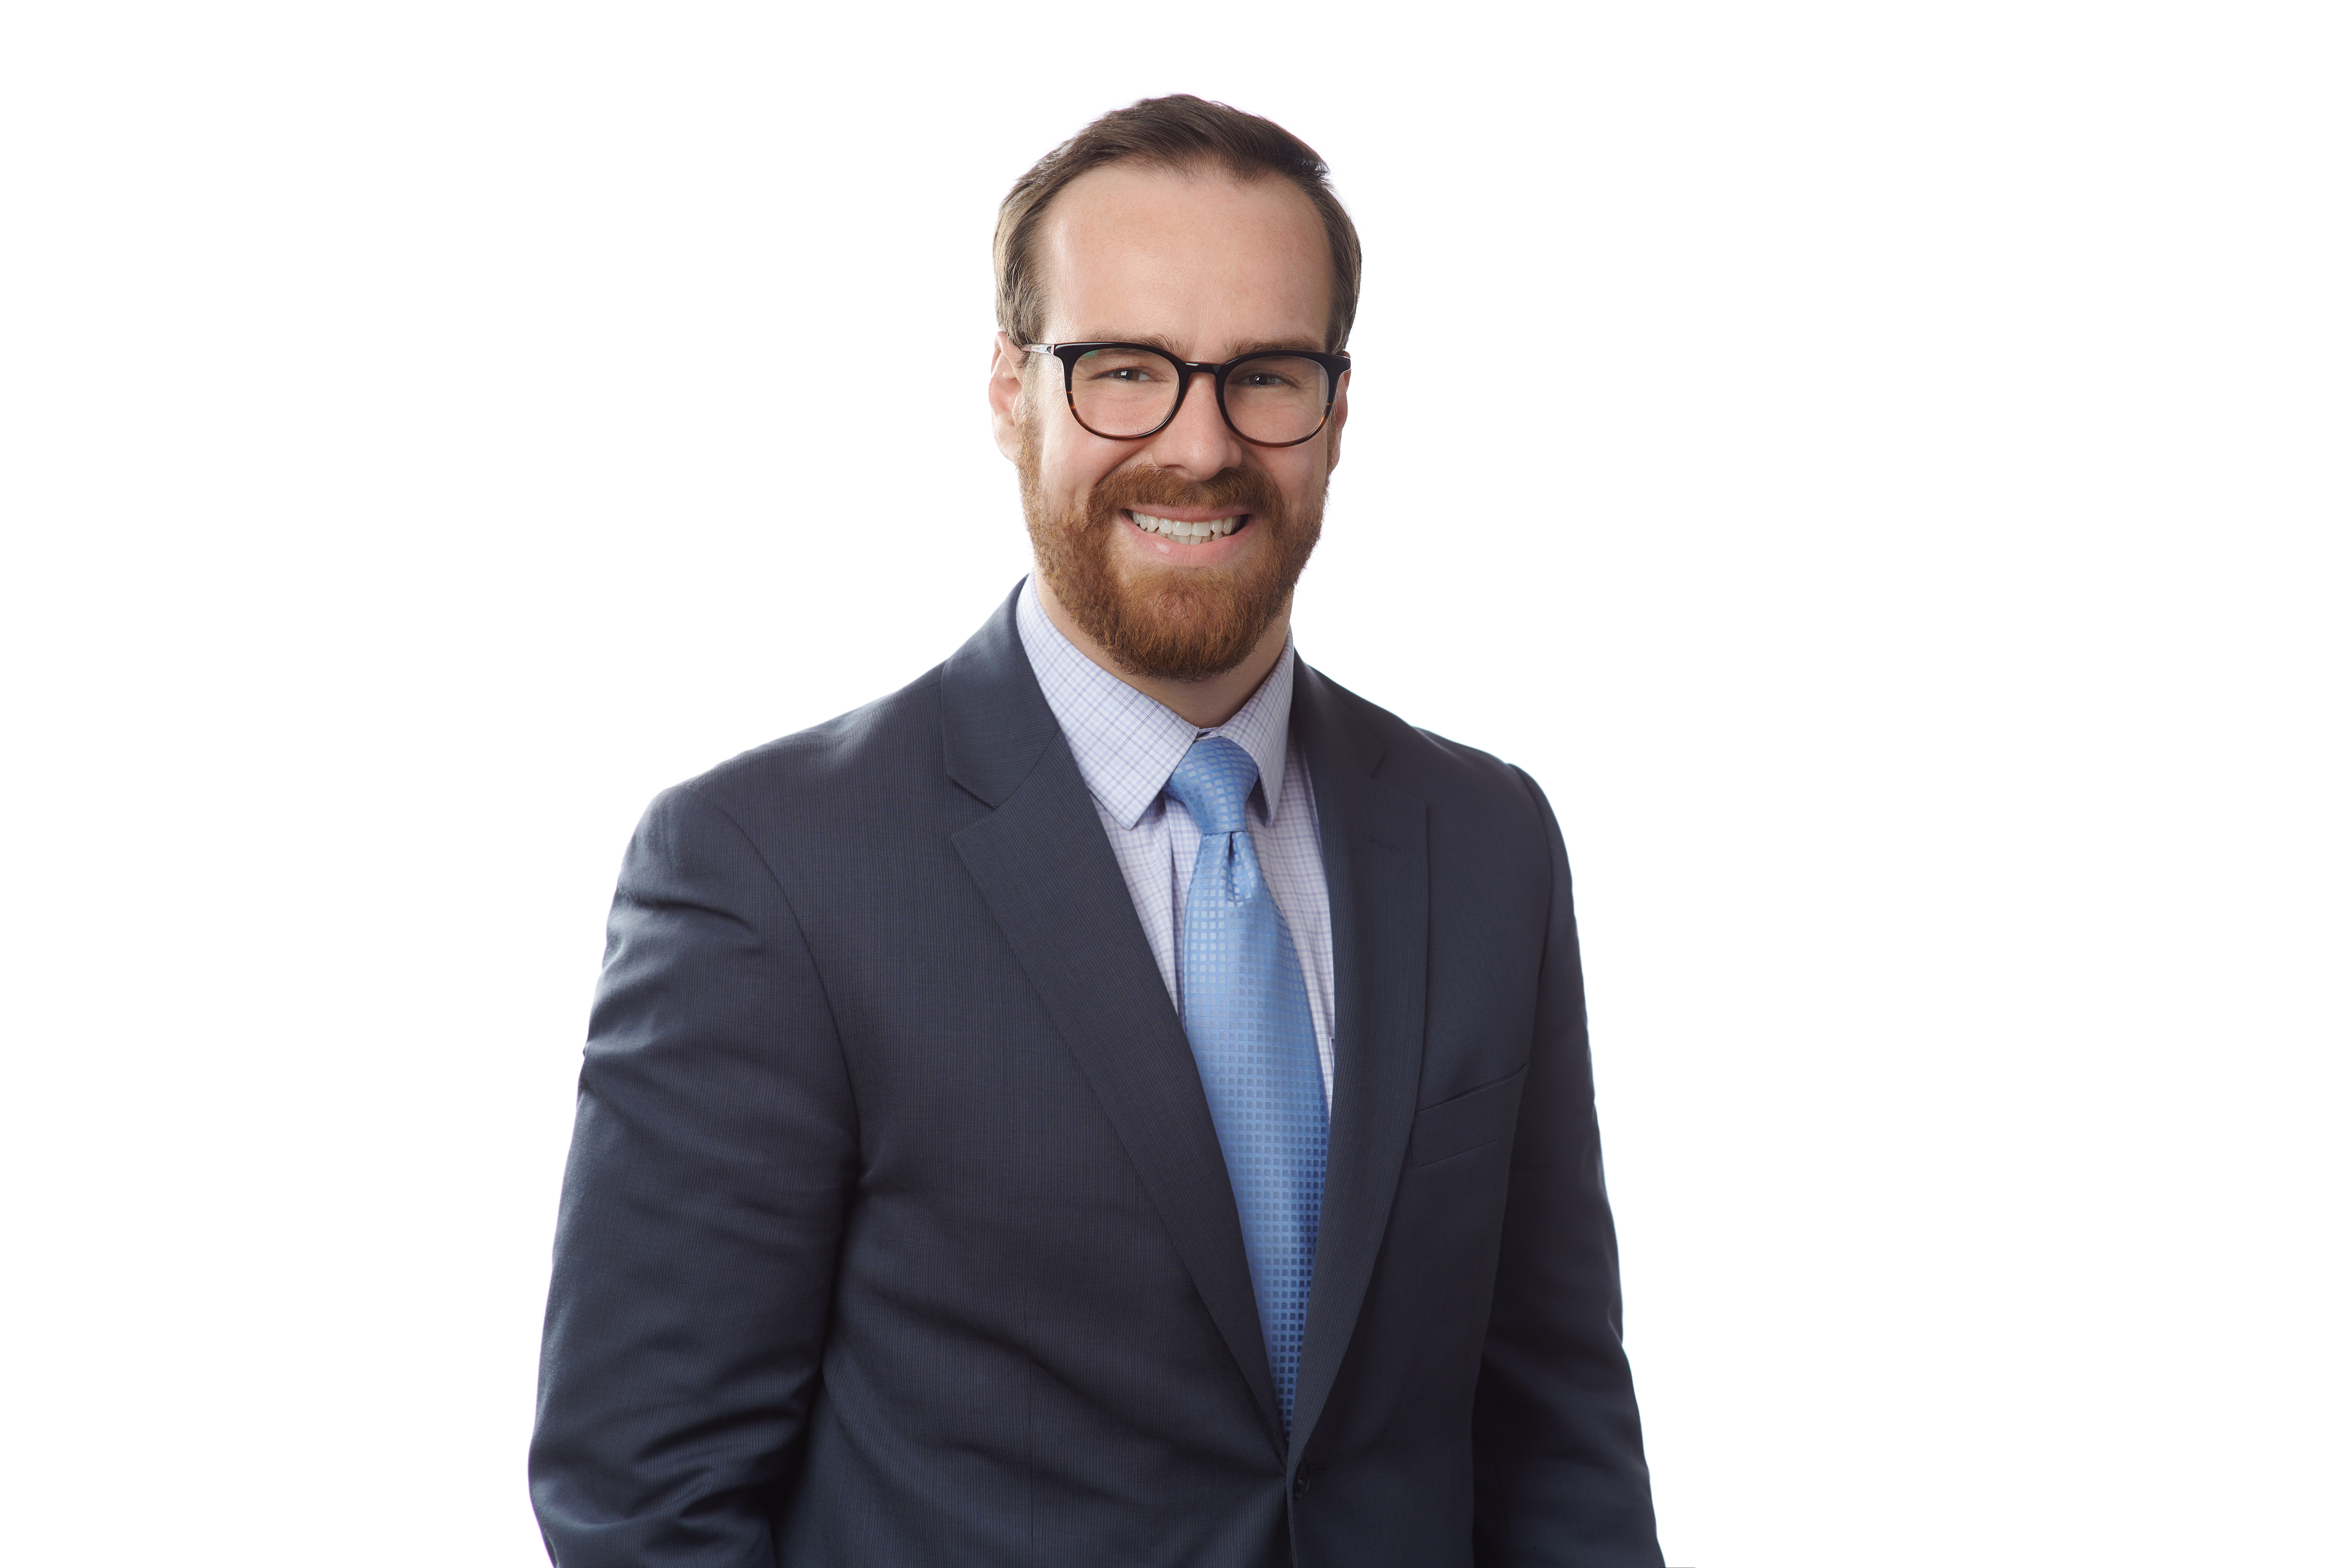 Patrick D. Hayes, Senior Counsel with Calfee, Halter & Griswold LLP and Host of The Securities Compliance Podcast: Compliance in Context